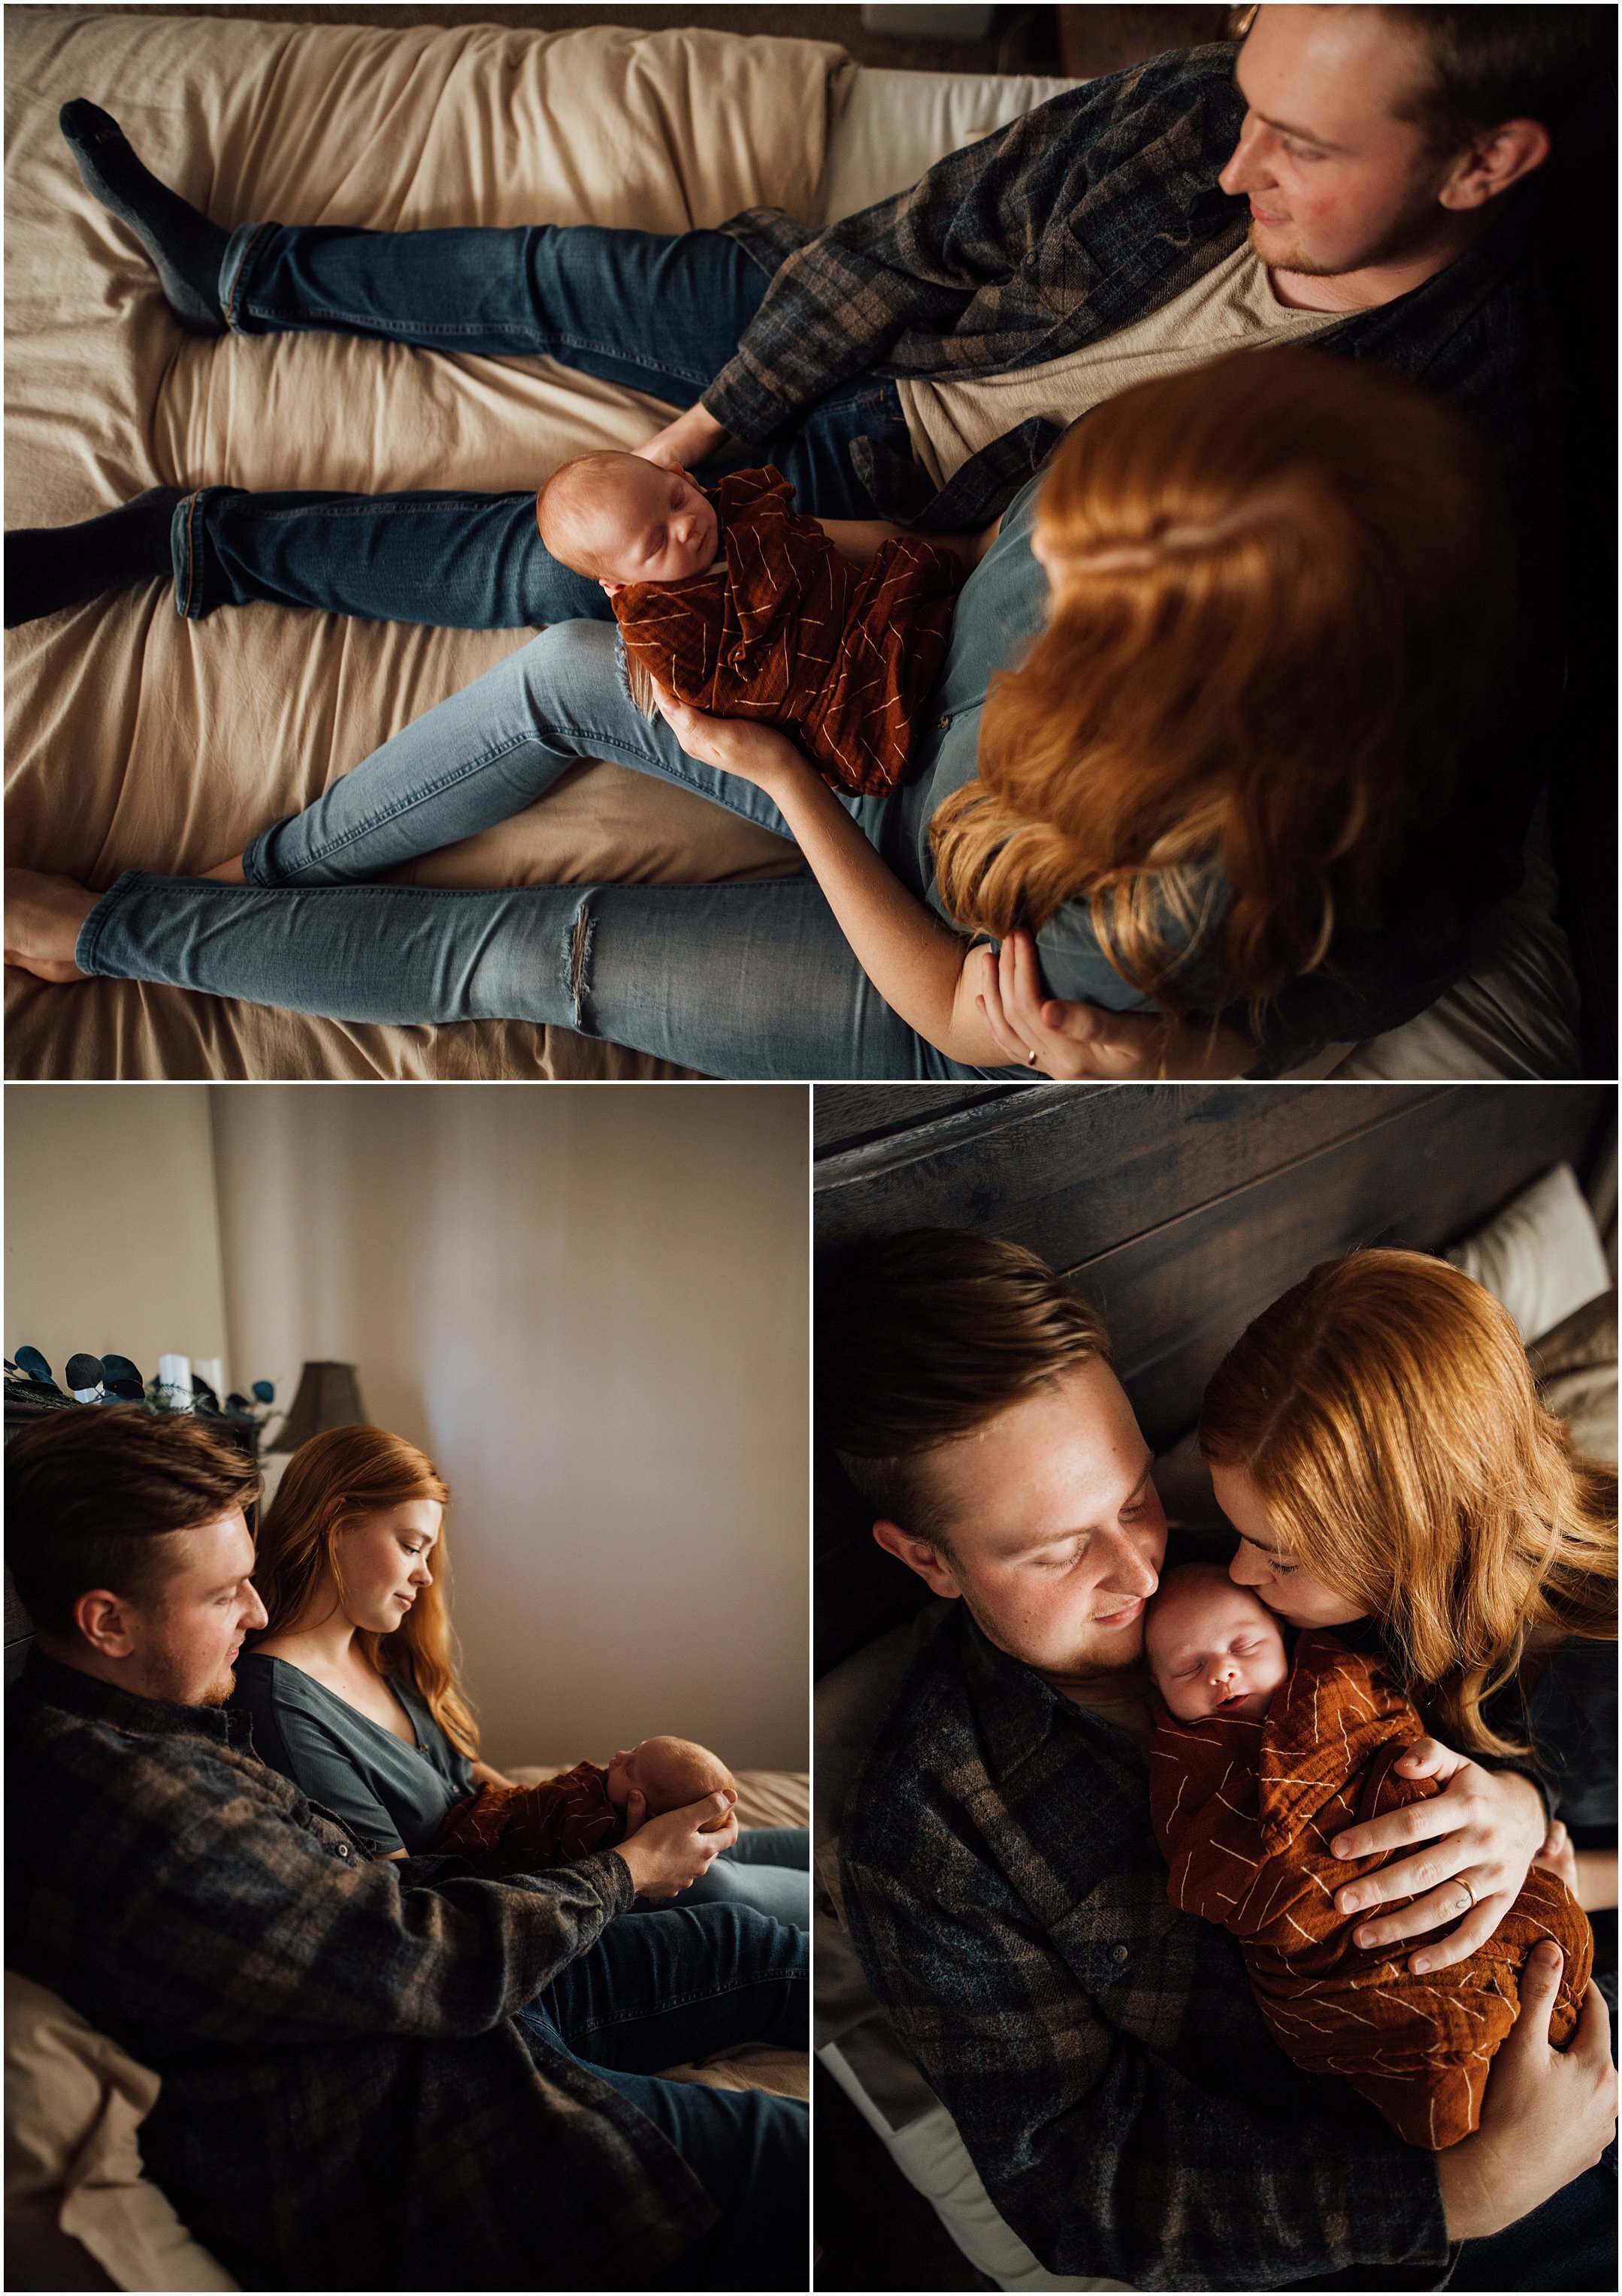 Kelly Lovan Photography | southern indiana newborn photographer | newborn photography style | newborn photography posing ideas | newborn photo mom and dad | newborn photos snuggling 